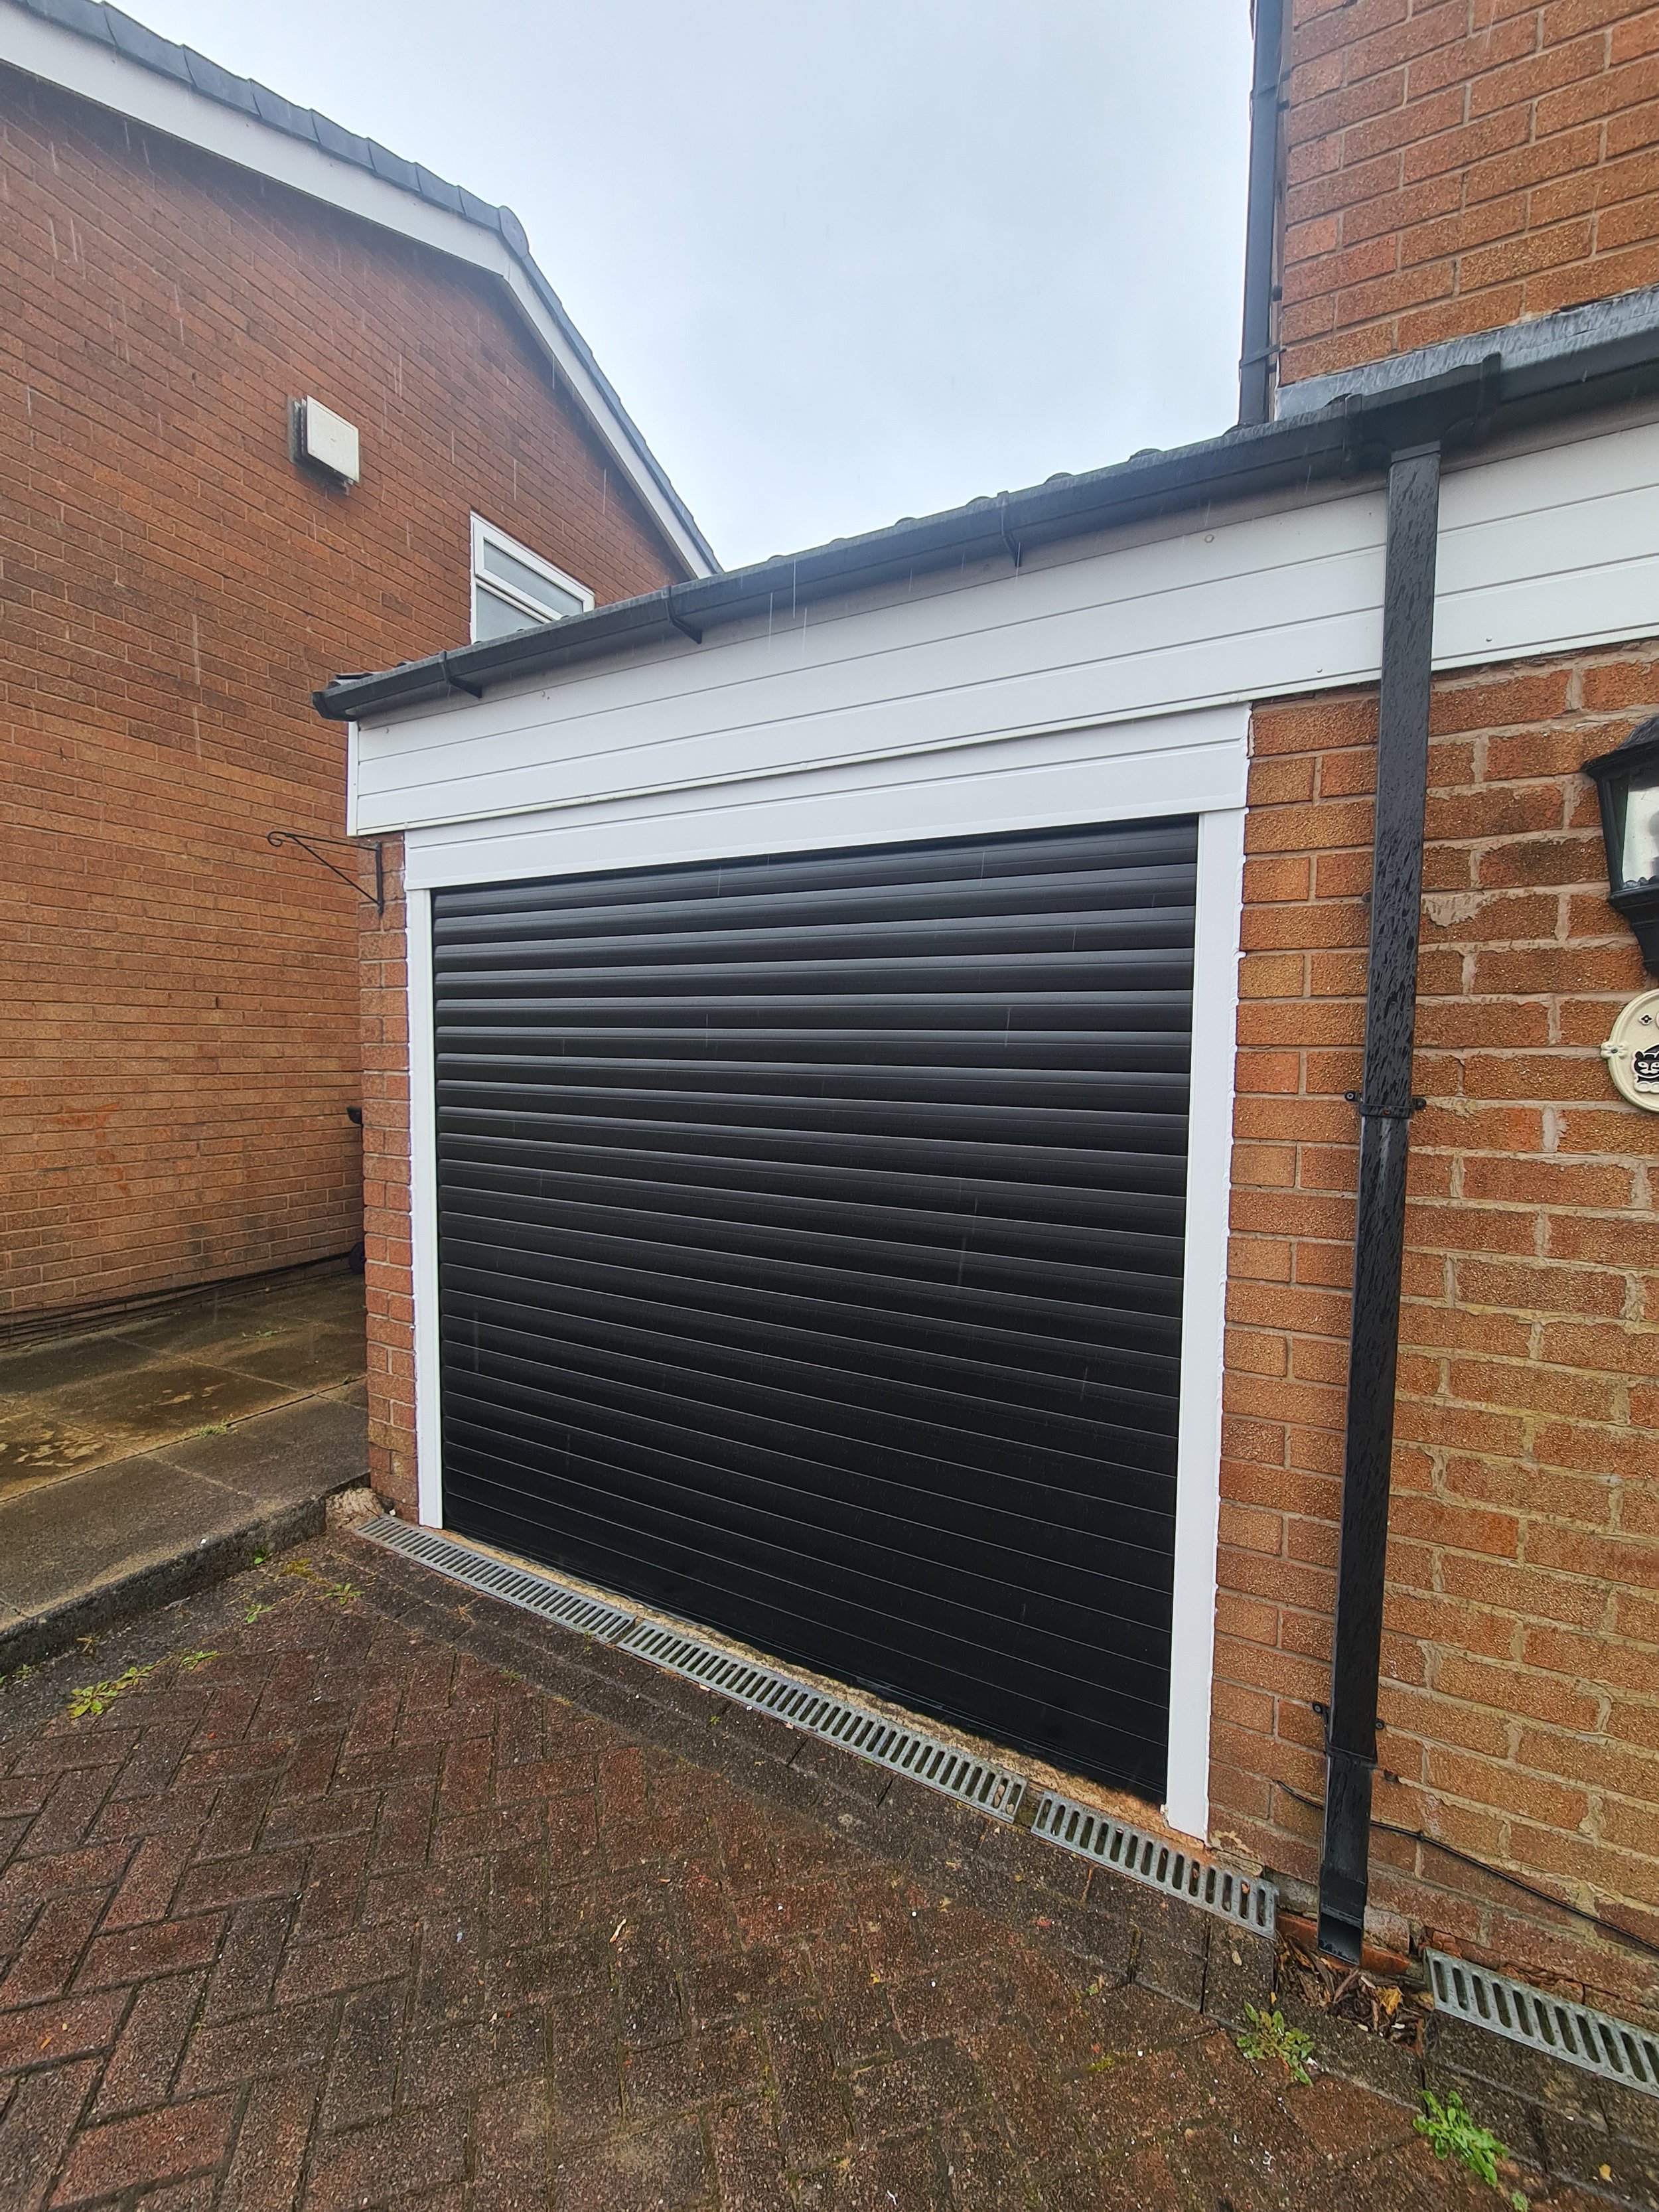 Uk Doors Midlands Classic 77m fully insulated roller garage door in smooth Black W/ White frame